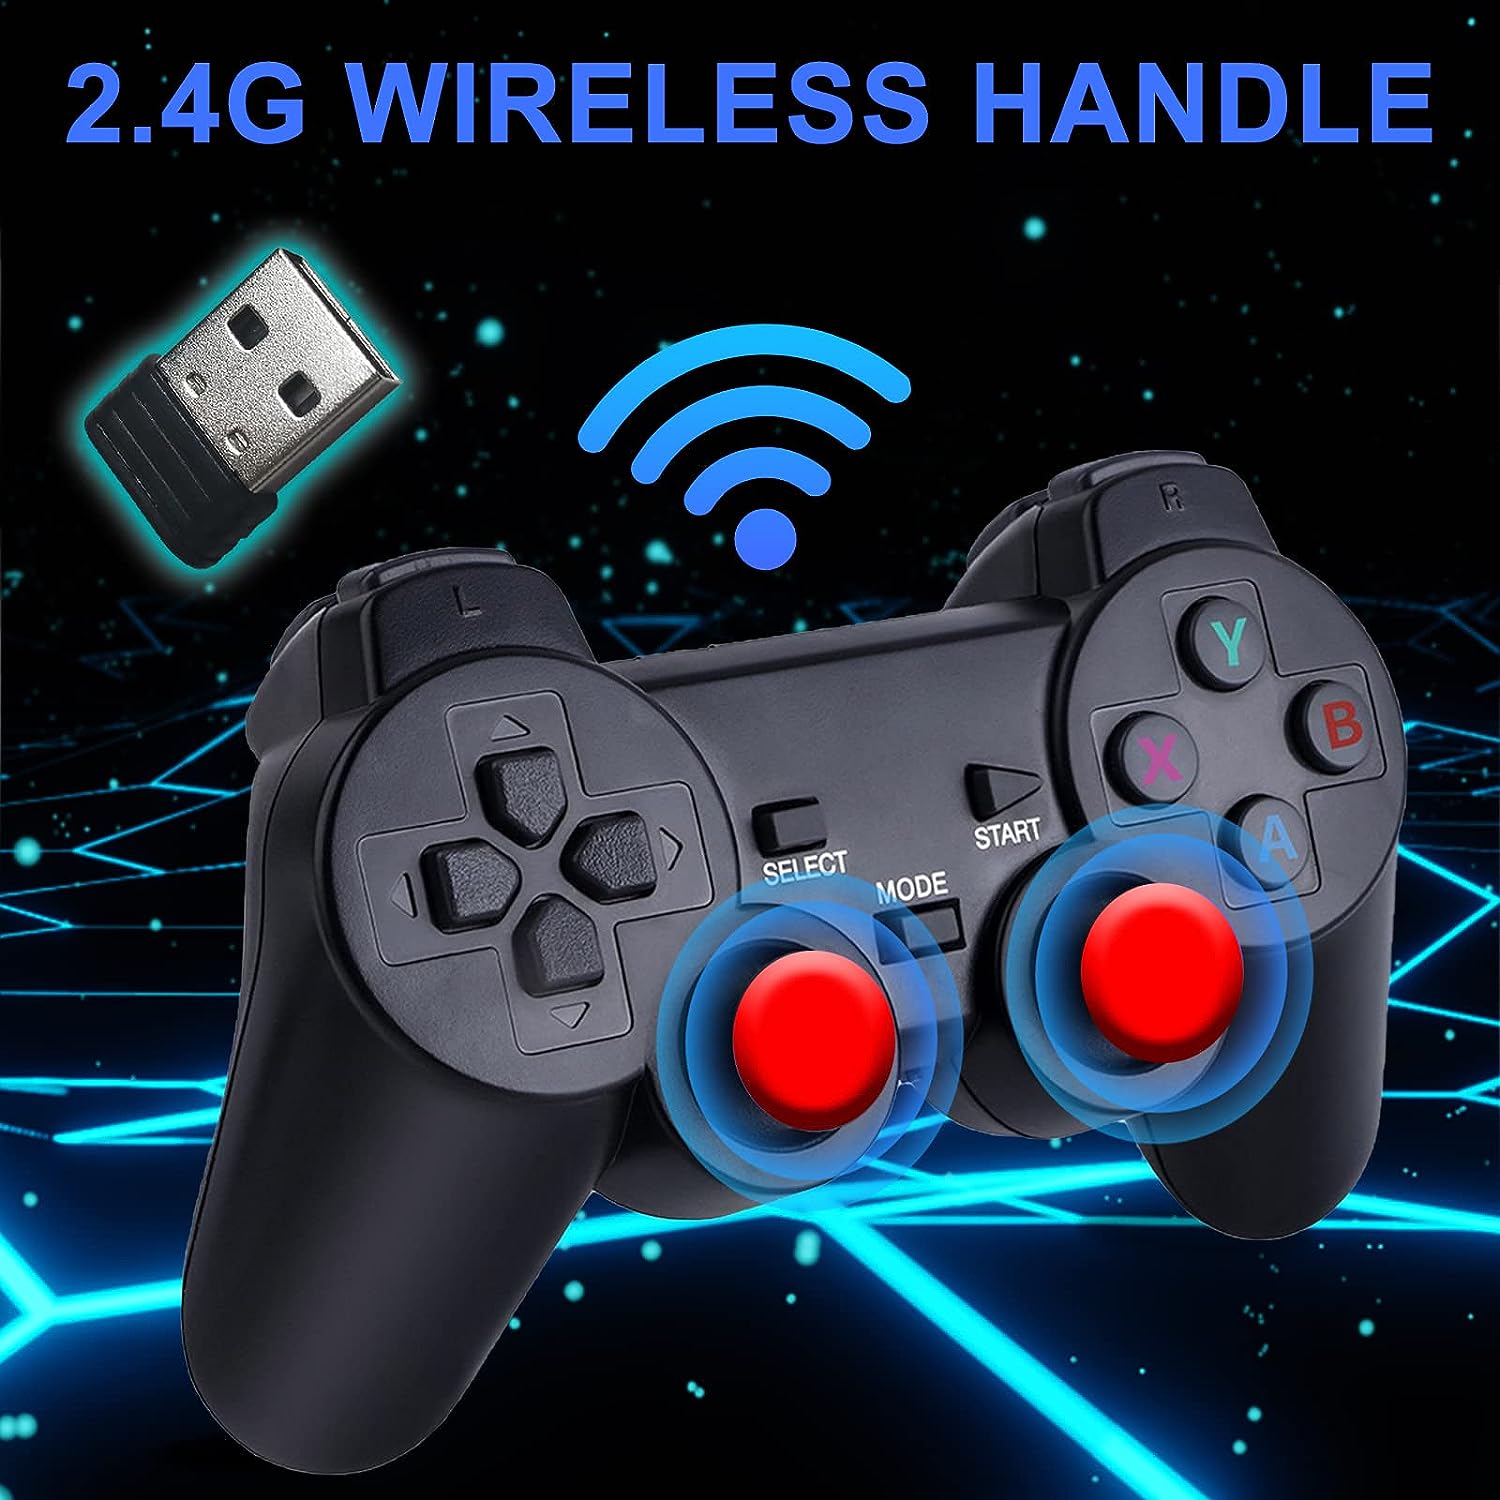 Wireless Retro Game Console,Retro play Game Stick,Nostalgia Stick Game,4K HDMI Output,Plug and Play Video Game Stick Built in 12000+ Games(64G)